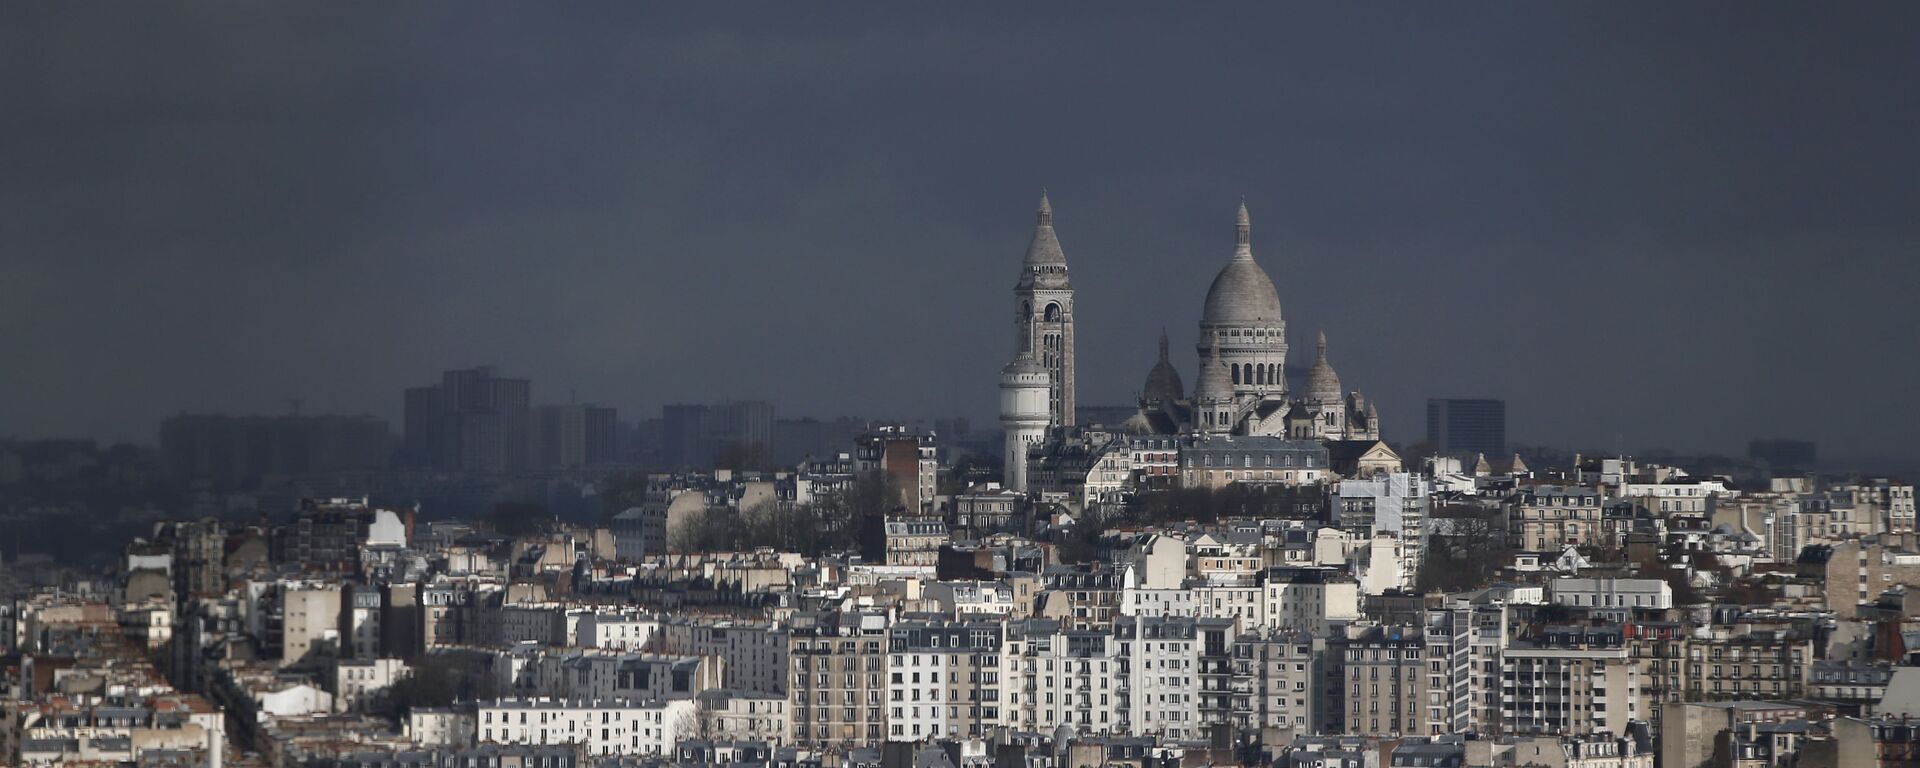 View of the Montmartre hill, with the Sacre Coeur Basilica, in Paris, Tuesday, March 27, 2018 - Sputnik International, 1920, 18.09.2021